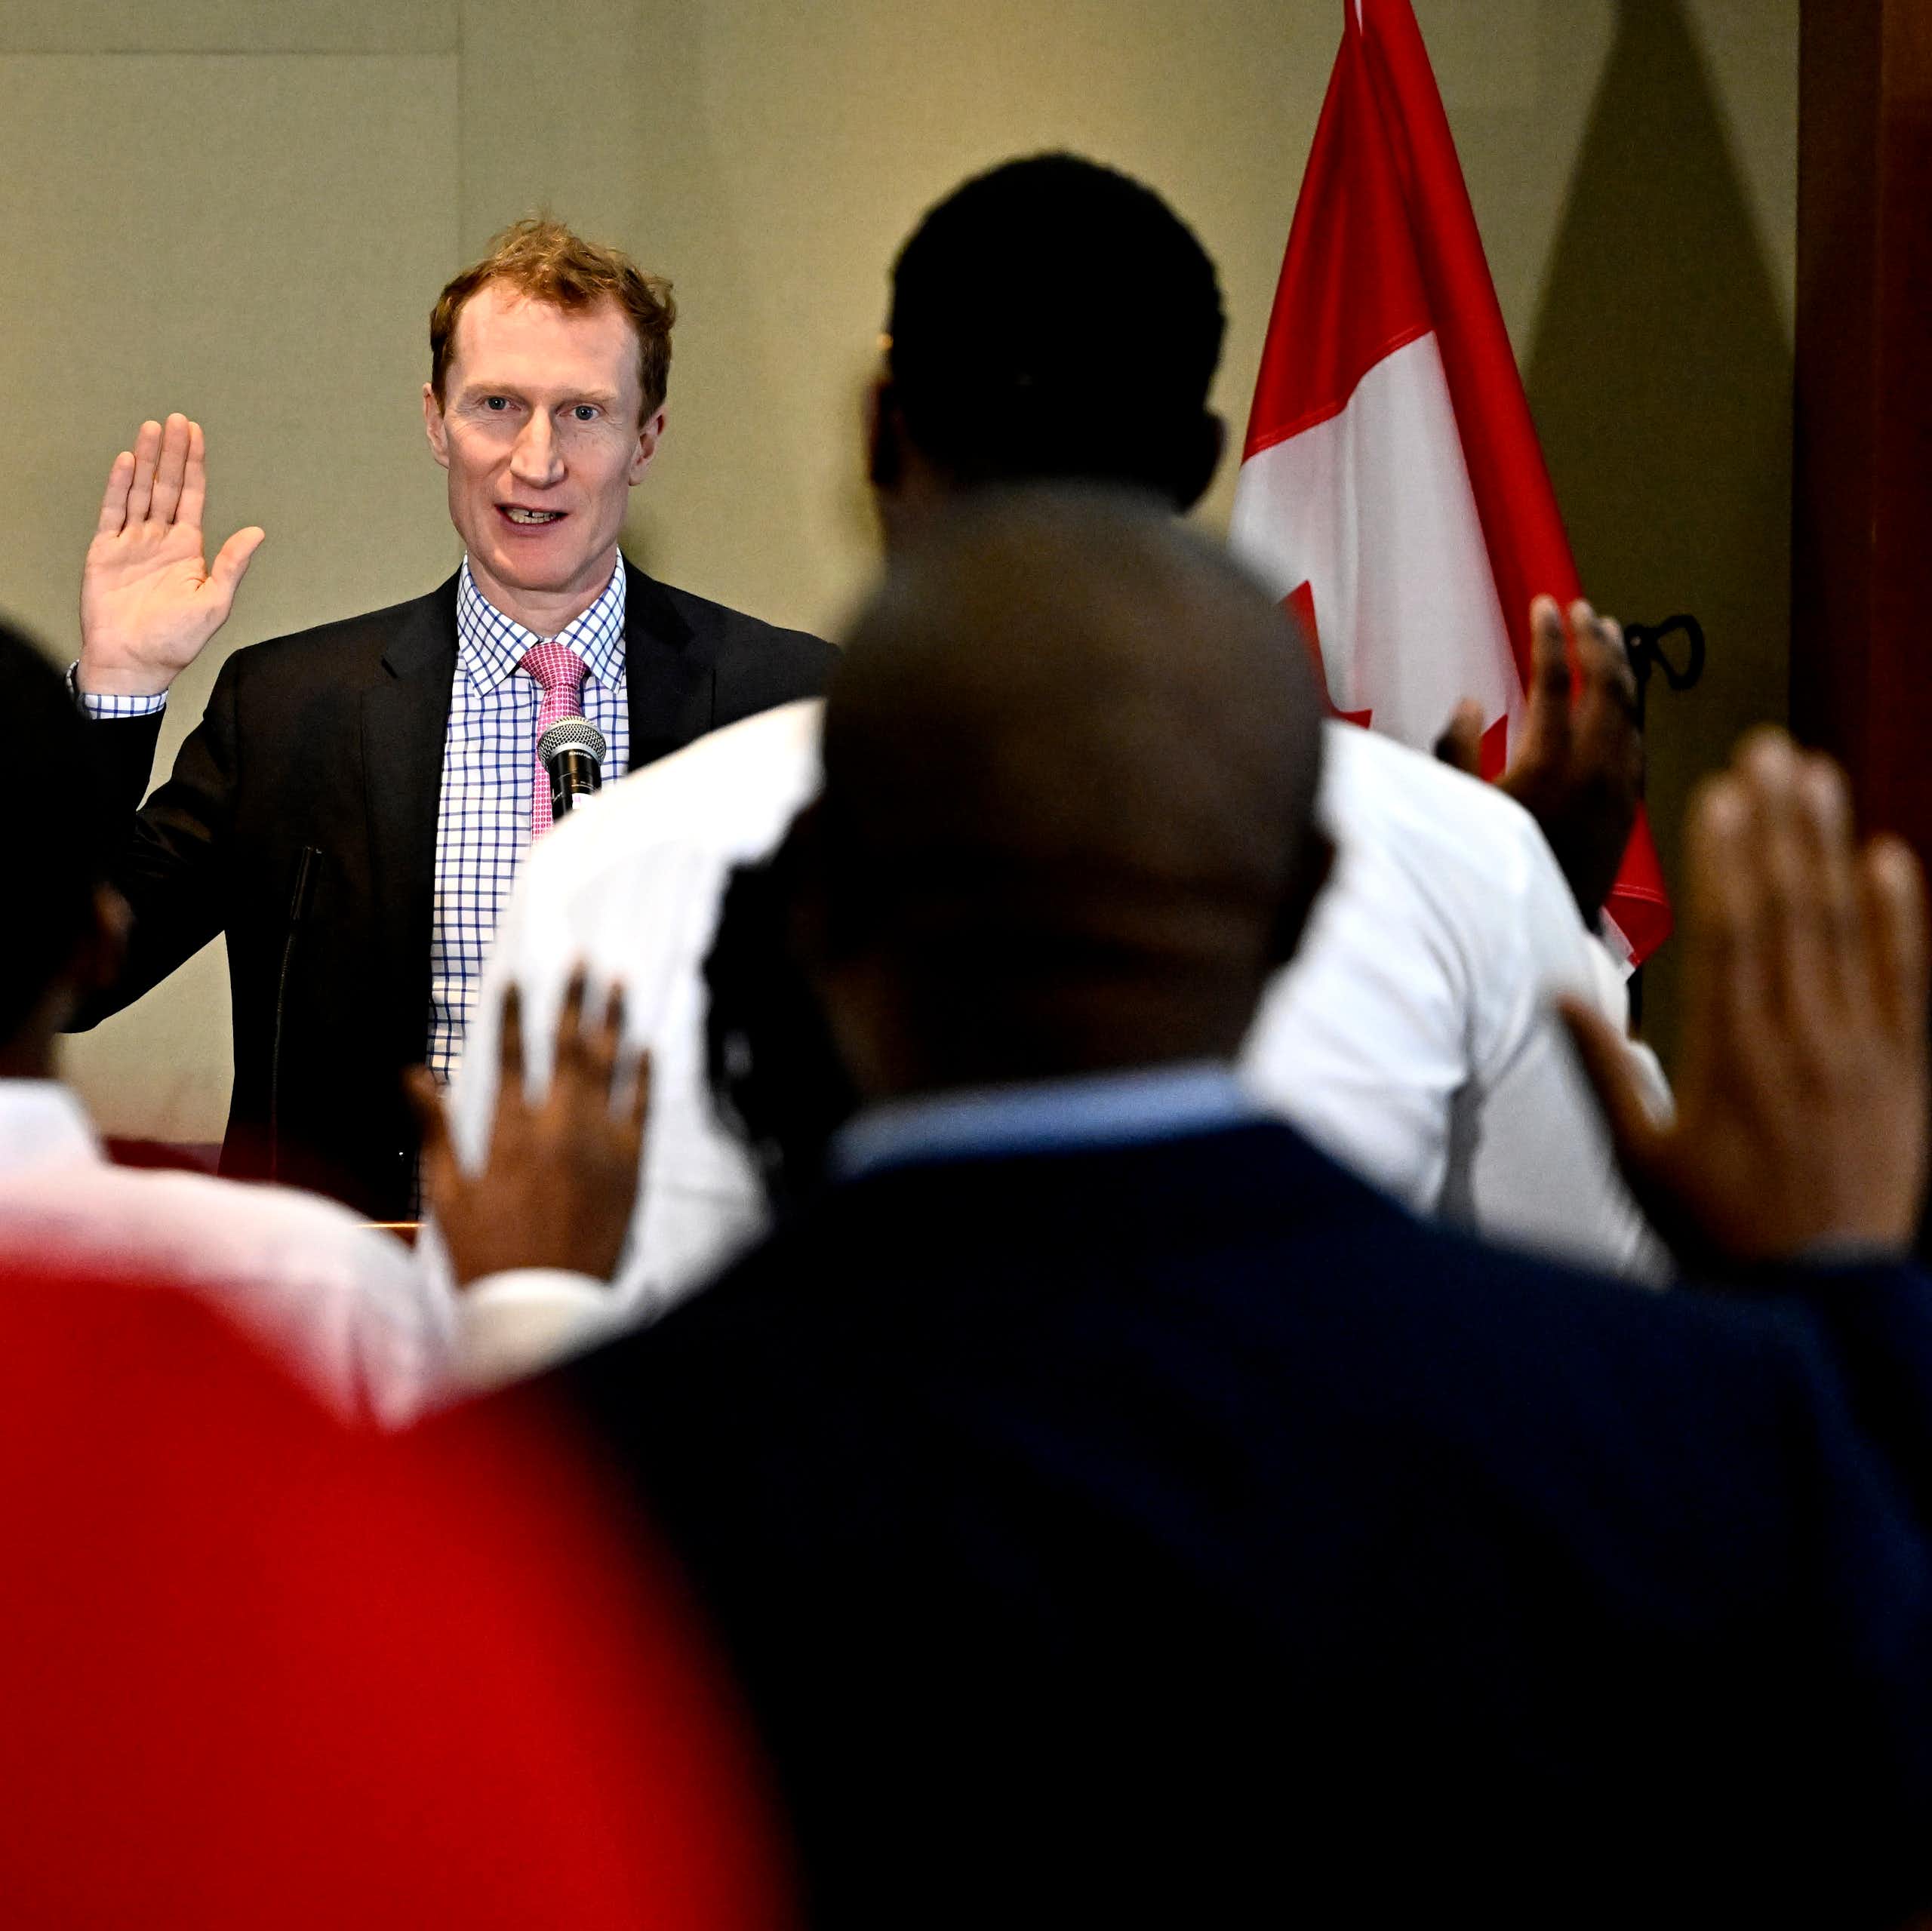 A man with red hair raises his hand as racialized people are photographed from behind raising their hands.